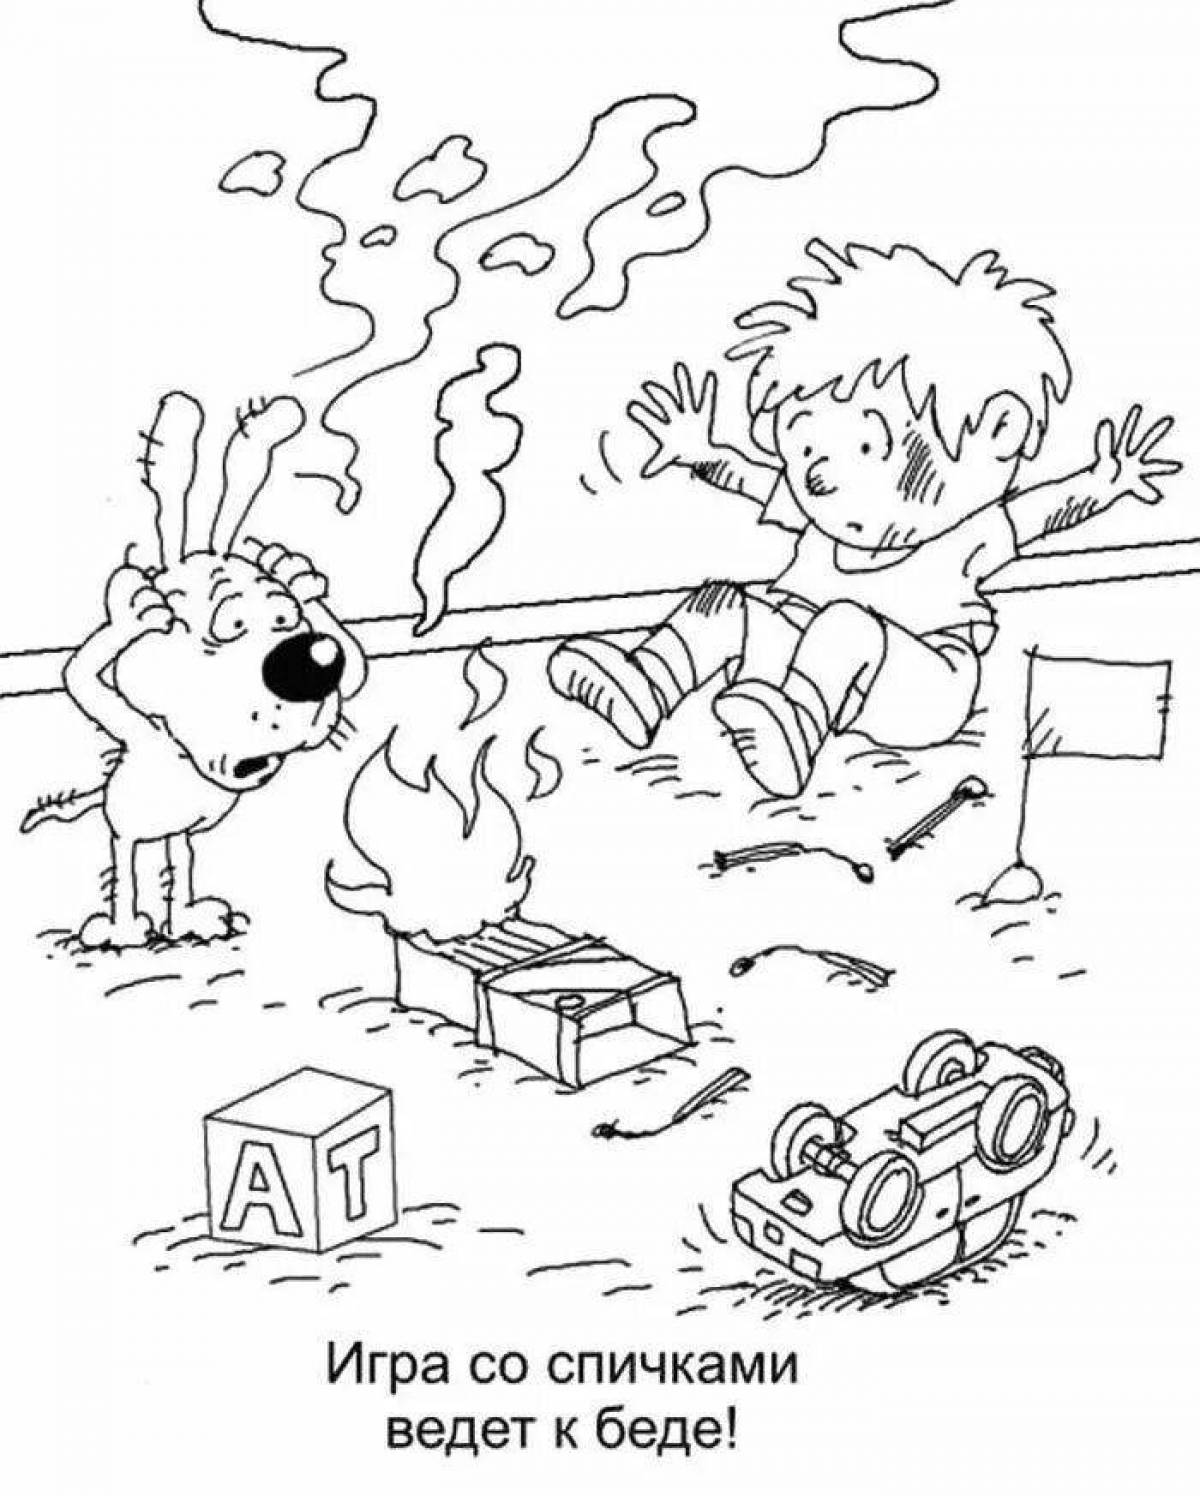 Fun coloring pages for babies